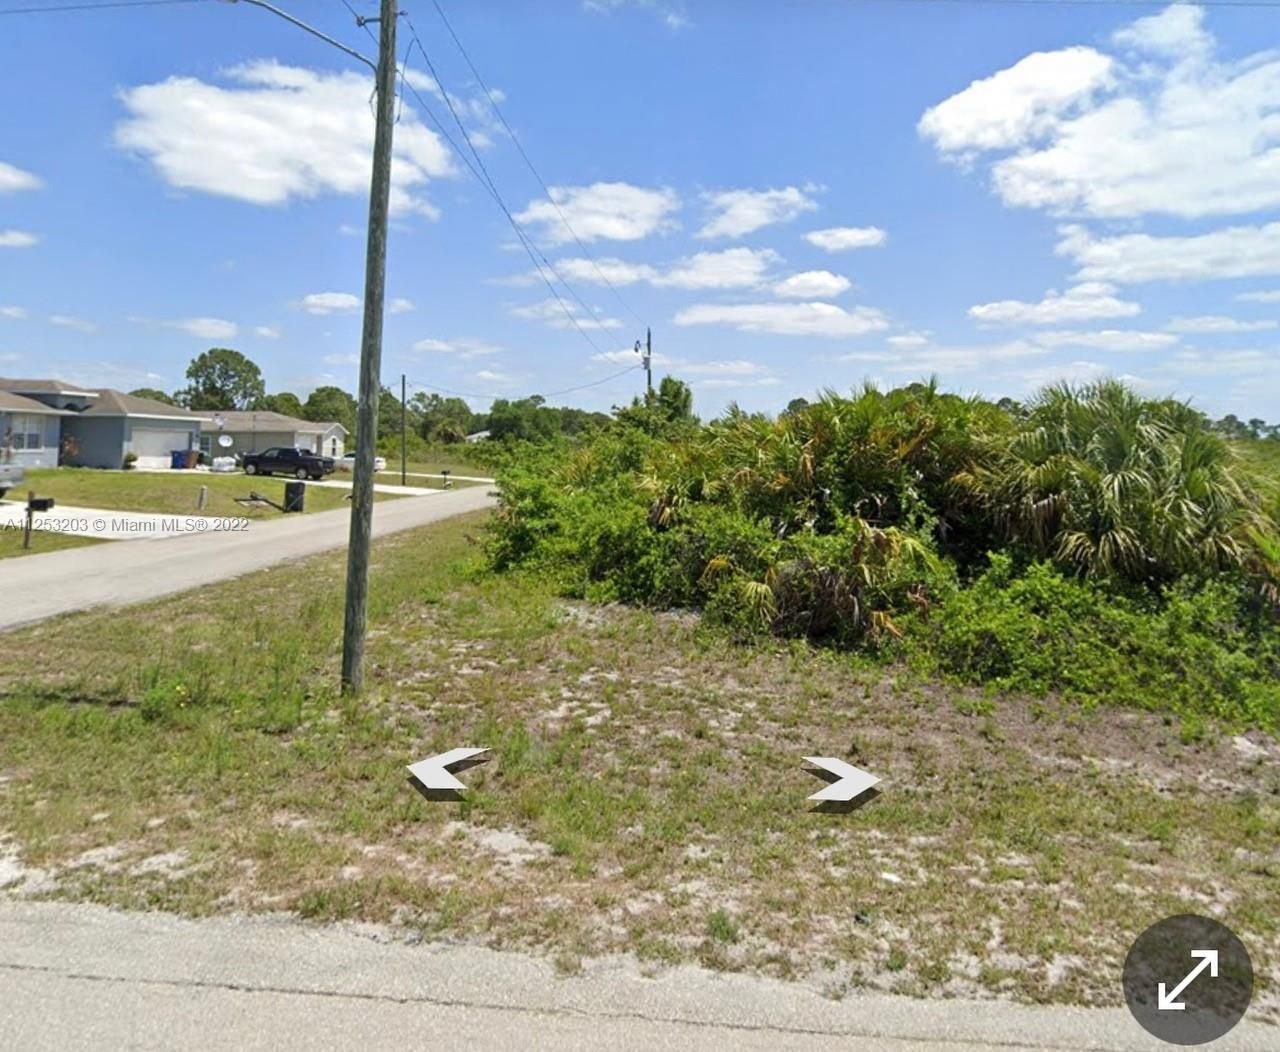 Real estate property located at 3219 65th st, Lee County, Lehigh Cares, Lehigh Acres, FL